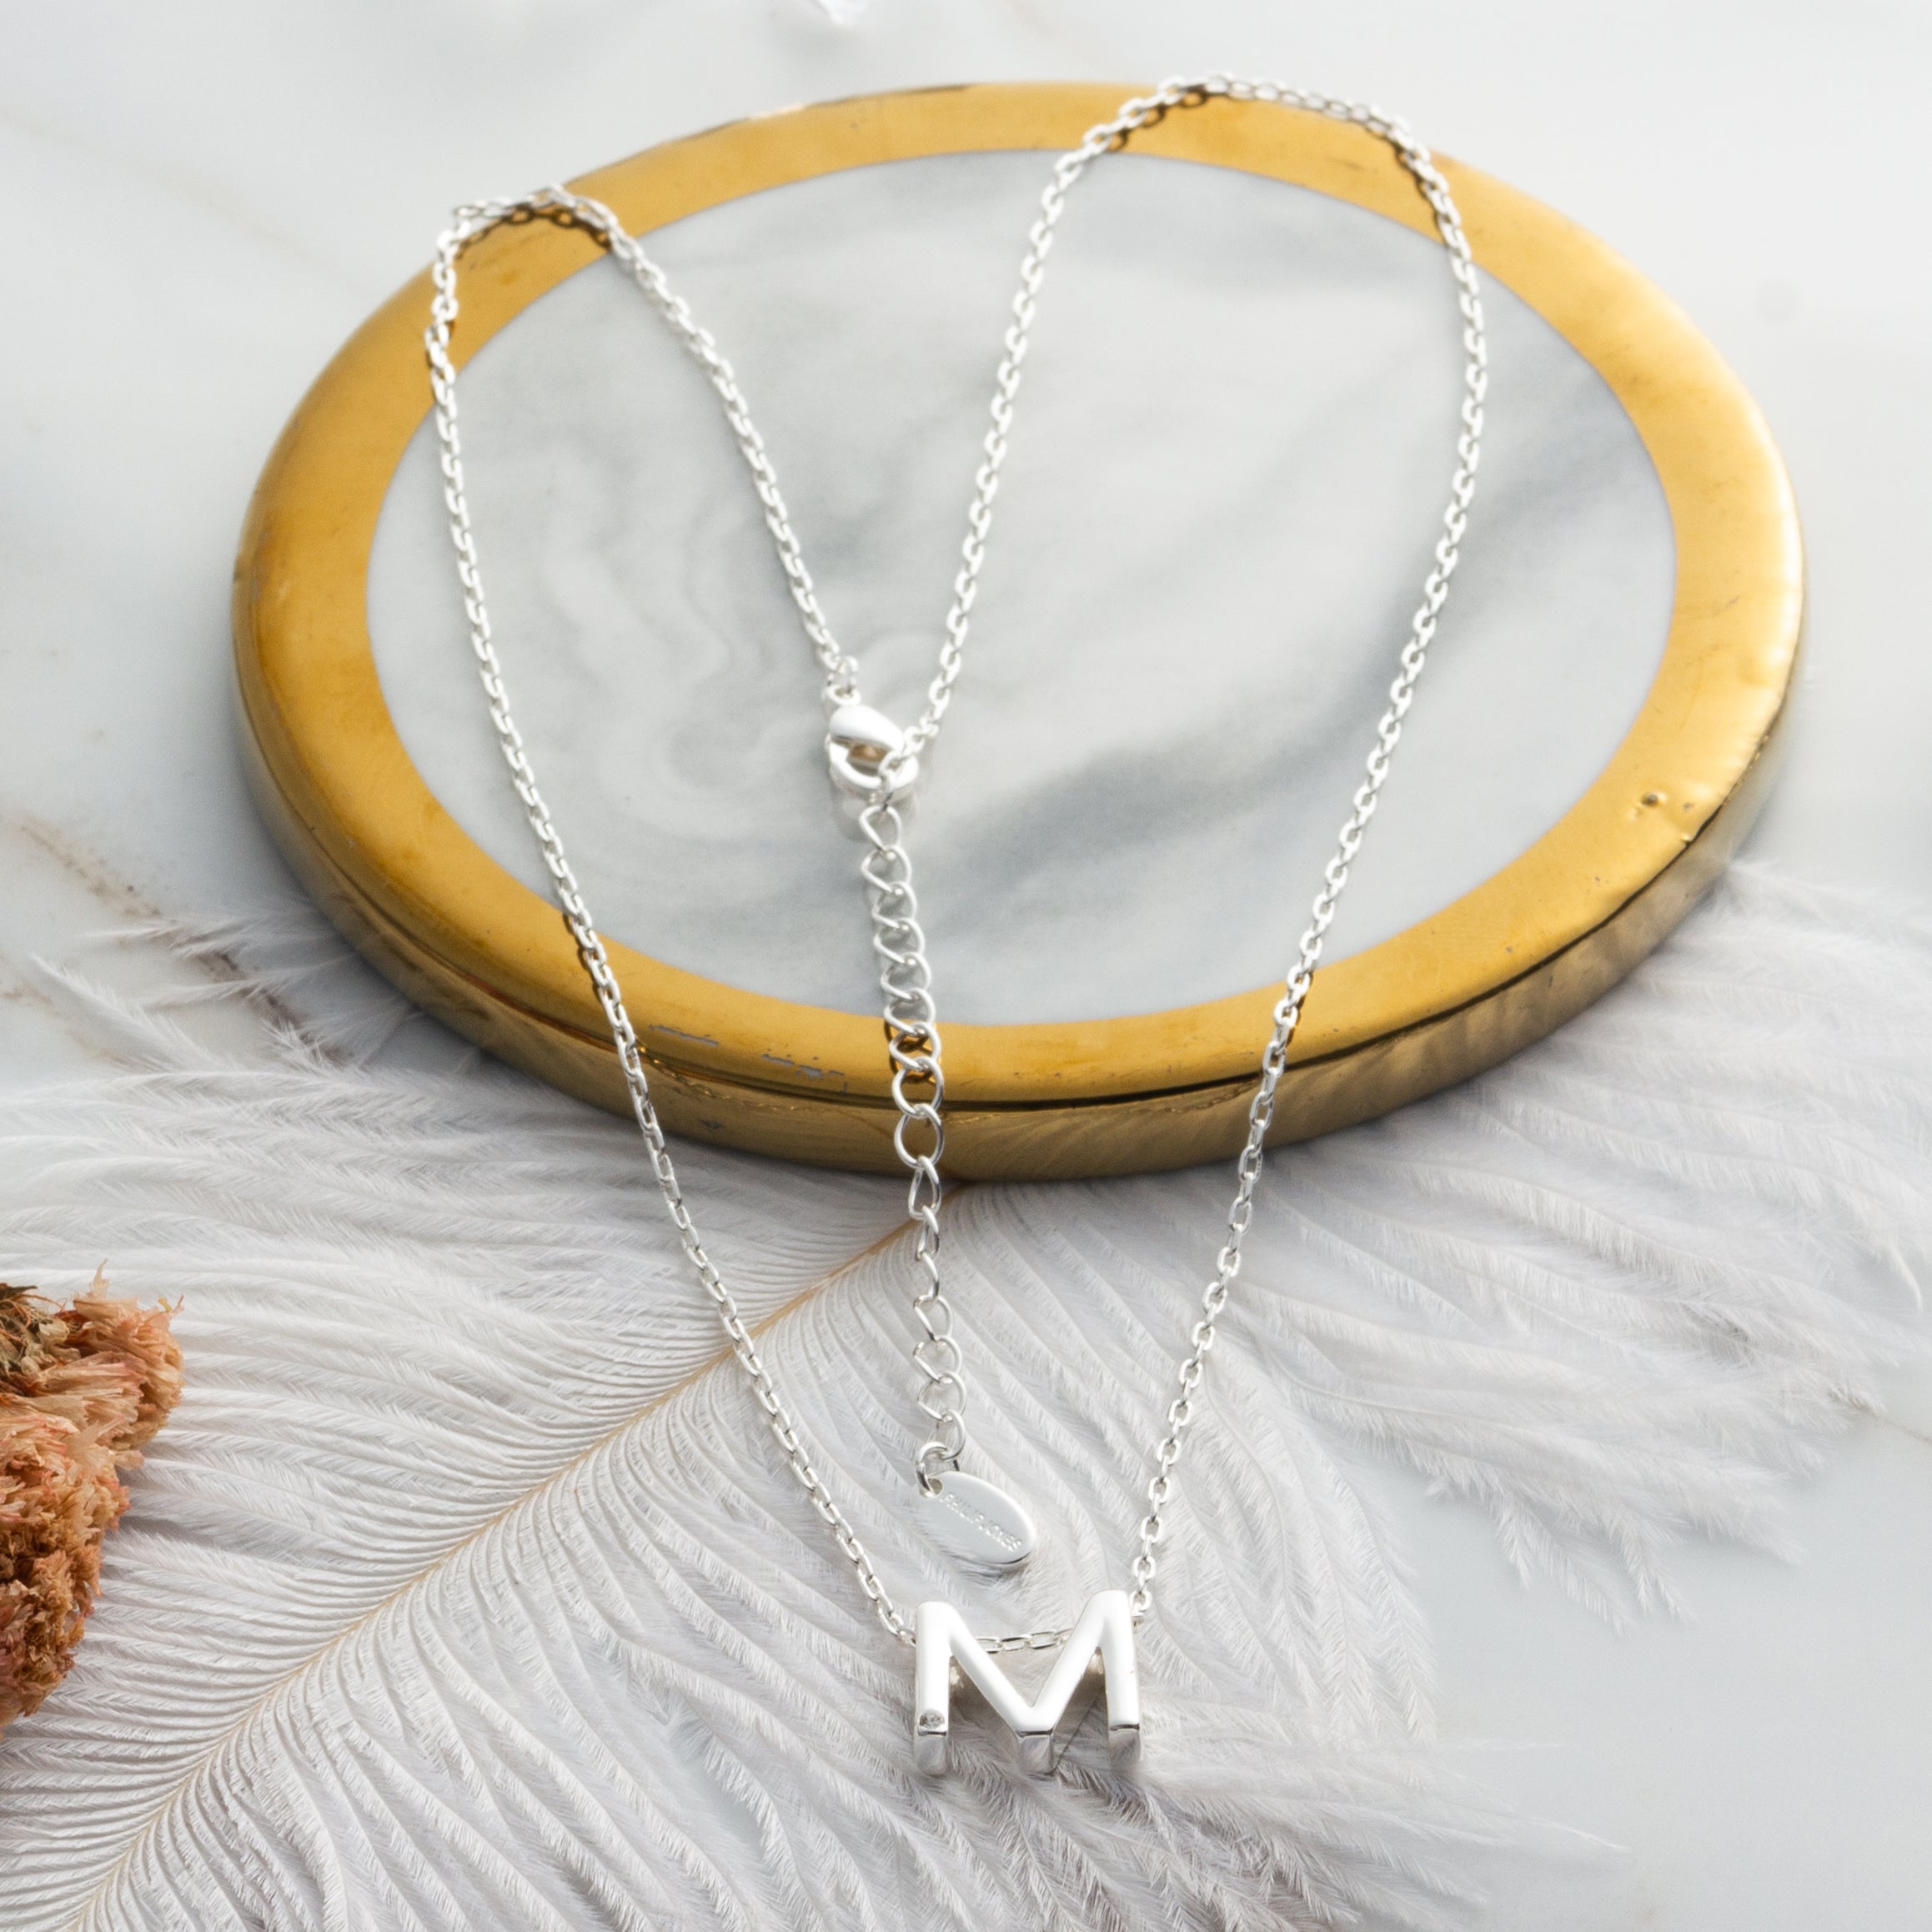 Initial Necklace Letter M Created with Zircondia® Crystals